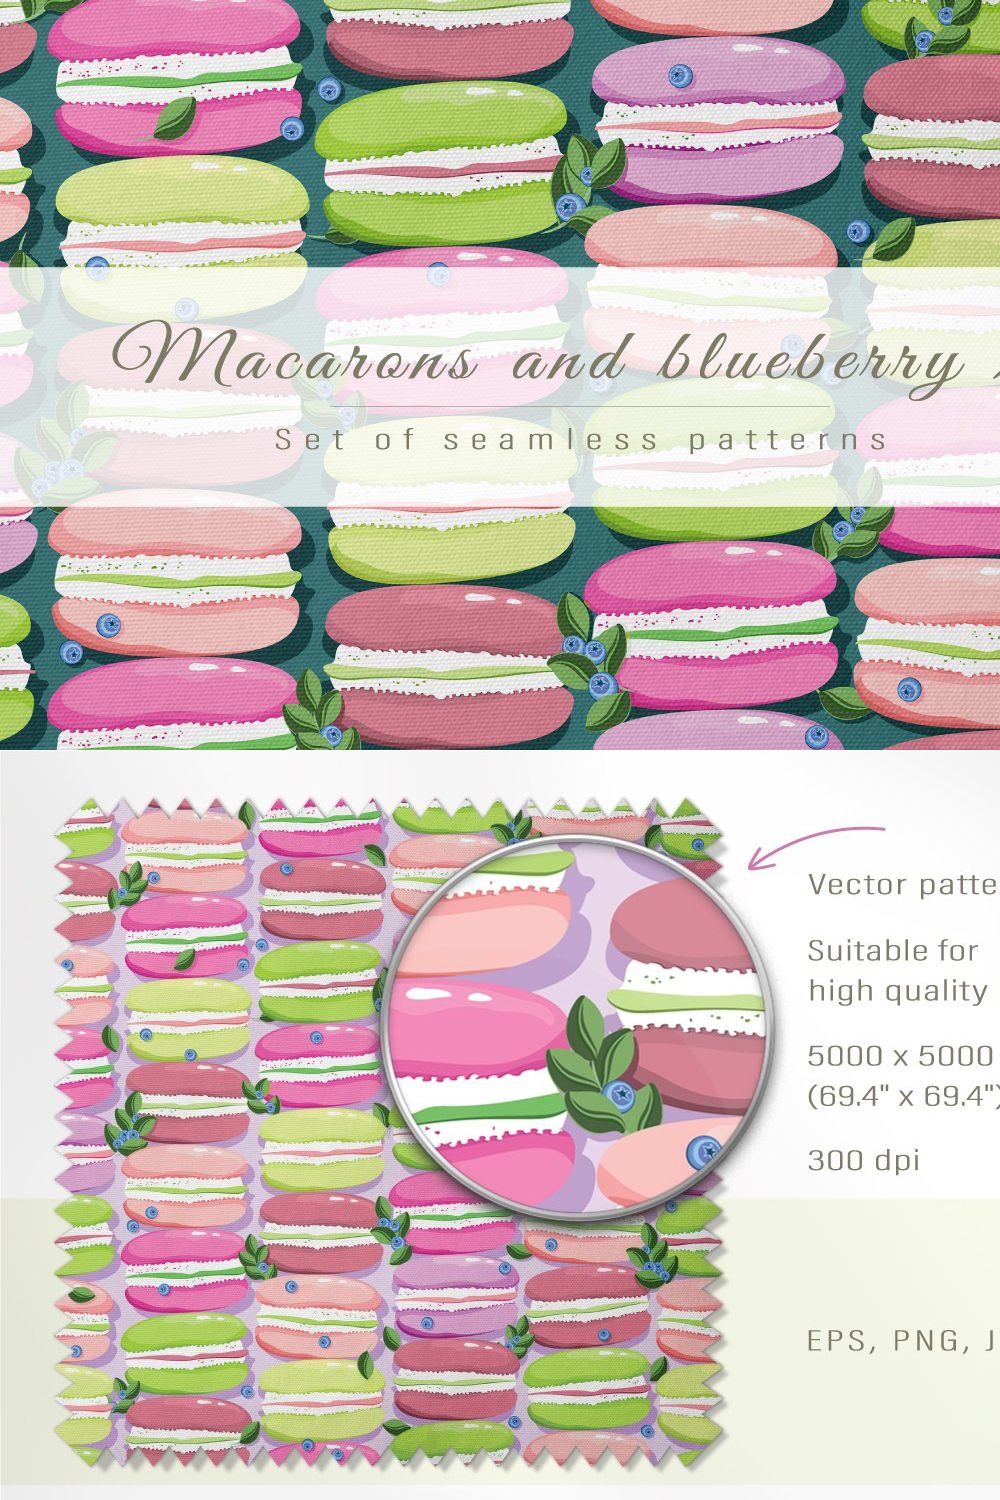 Macarons and blueberry 2 pinterest preview image.